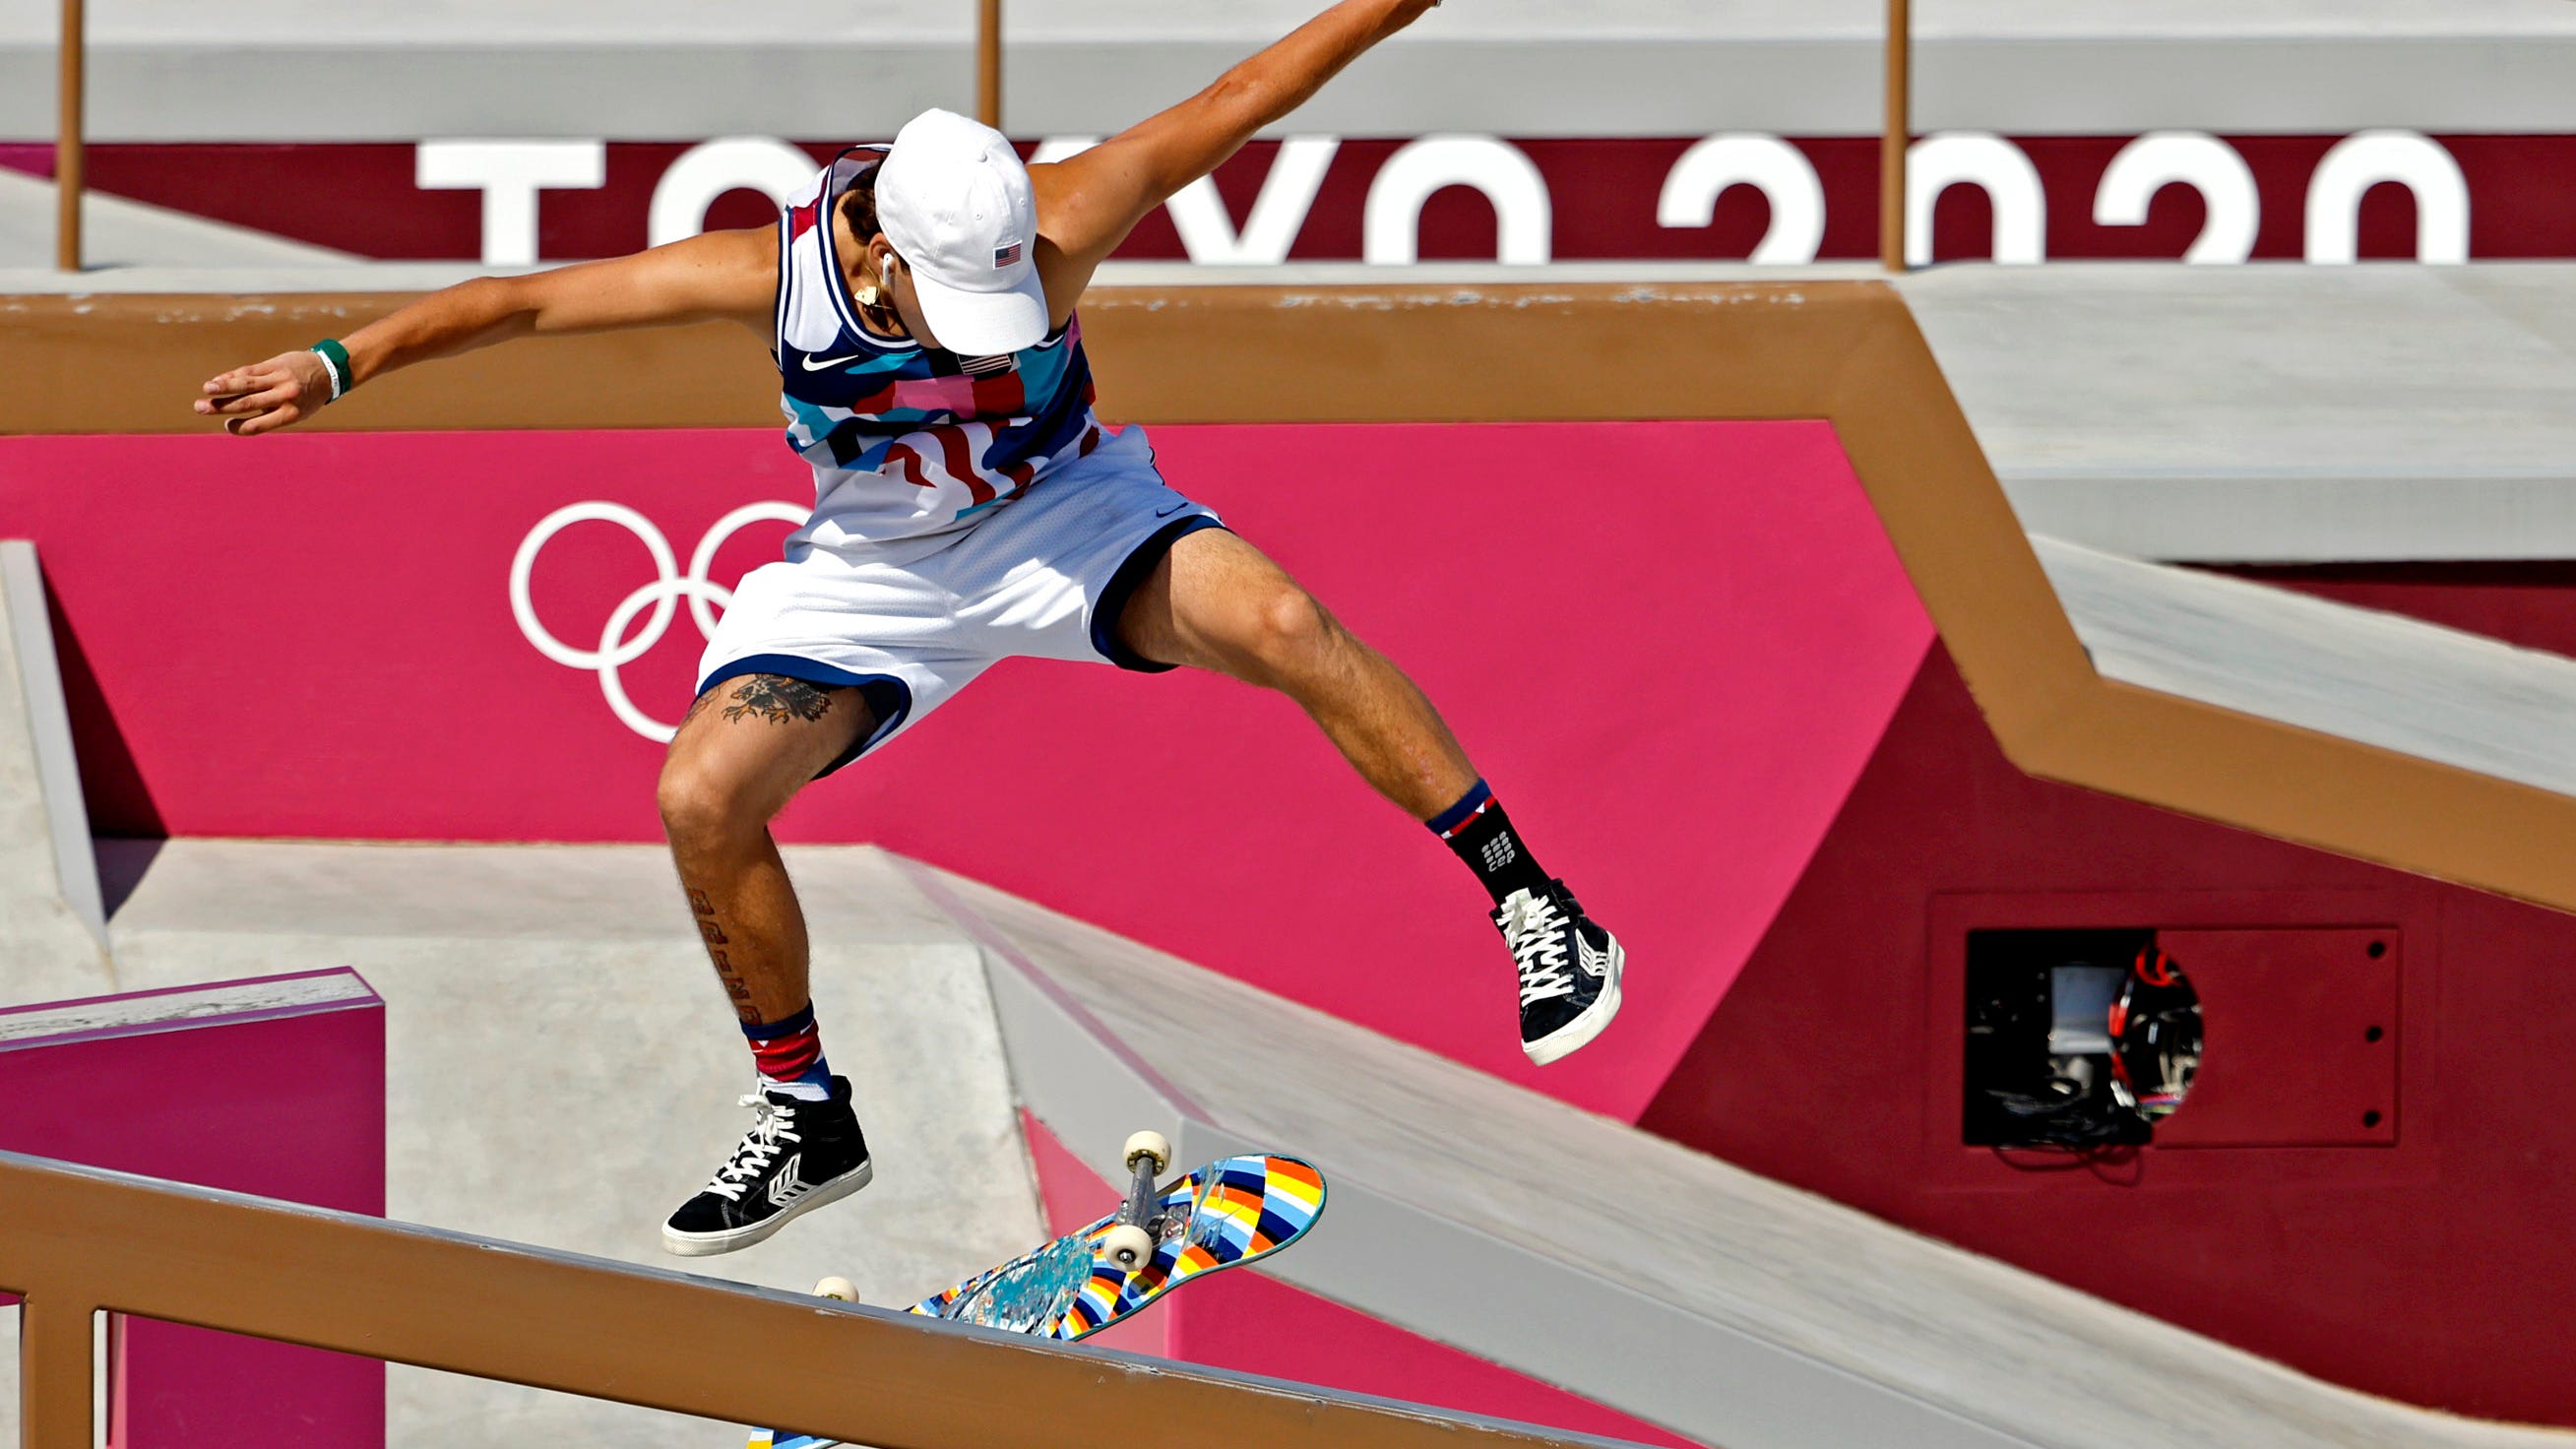 Team USA's Jagger Eaton wins bronze in first Olympic skateboarding event